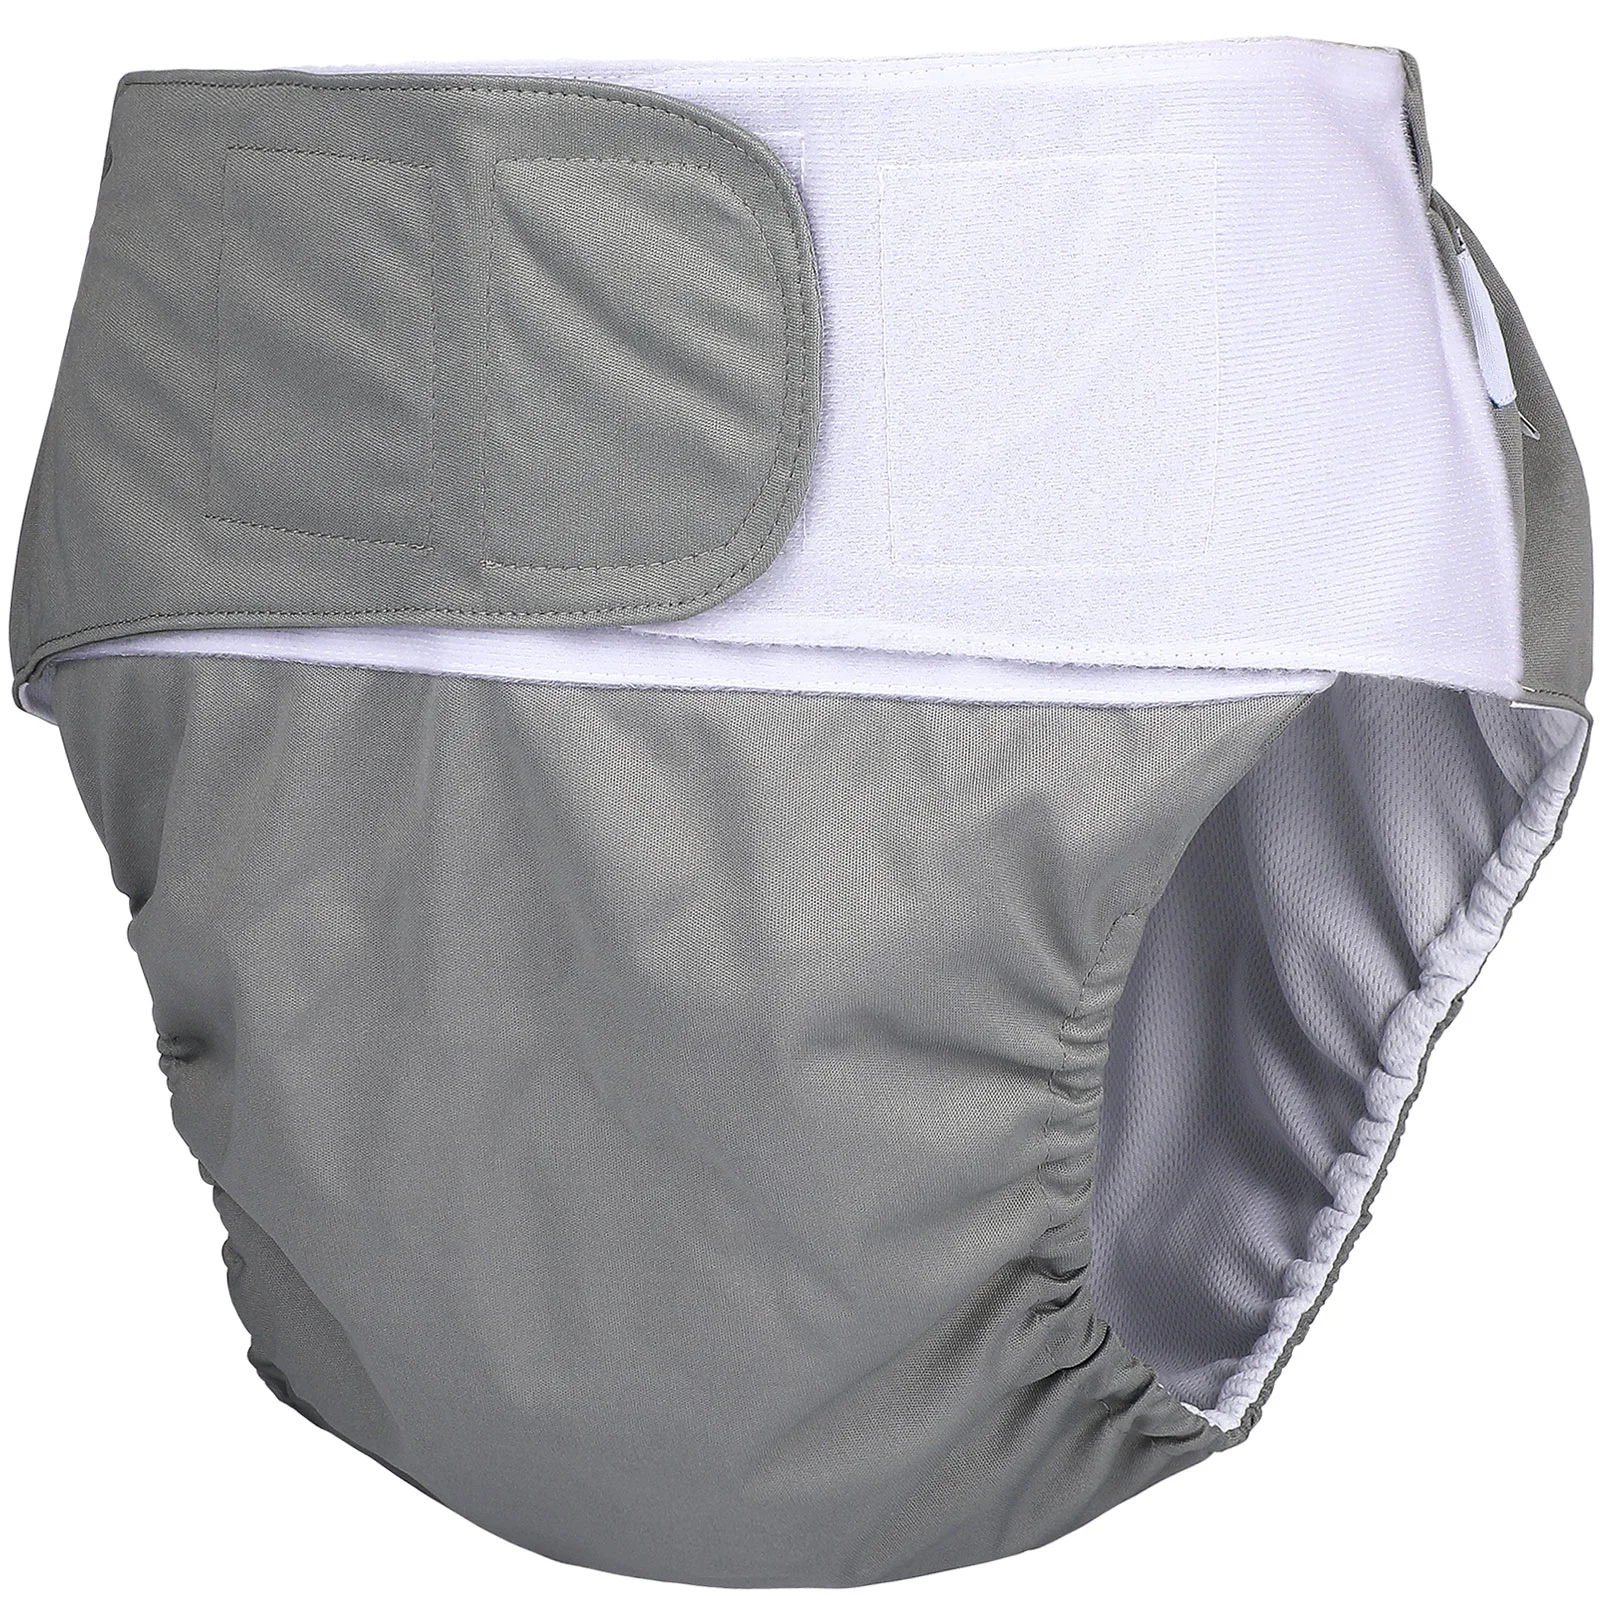 

Washable Adult Diaper Clothing Inserts Diapers Adults Women Leak-free Reusable Pants Elderly Oversized Nappies